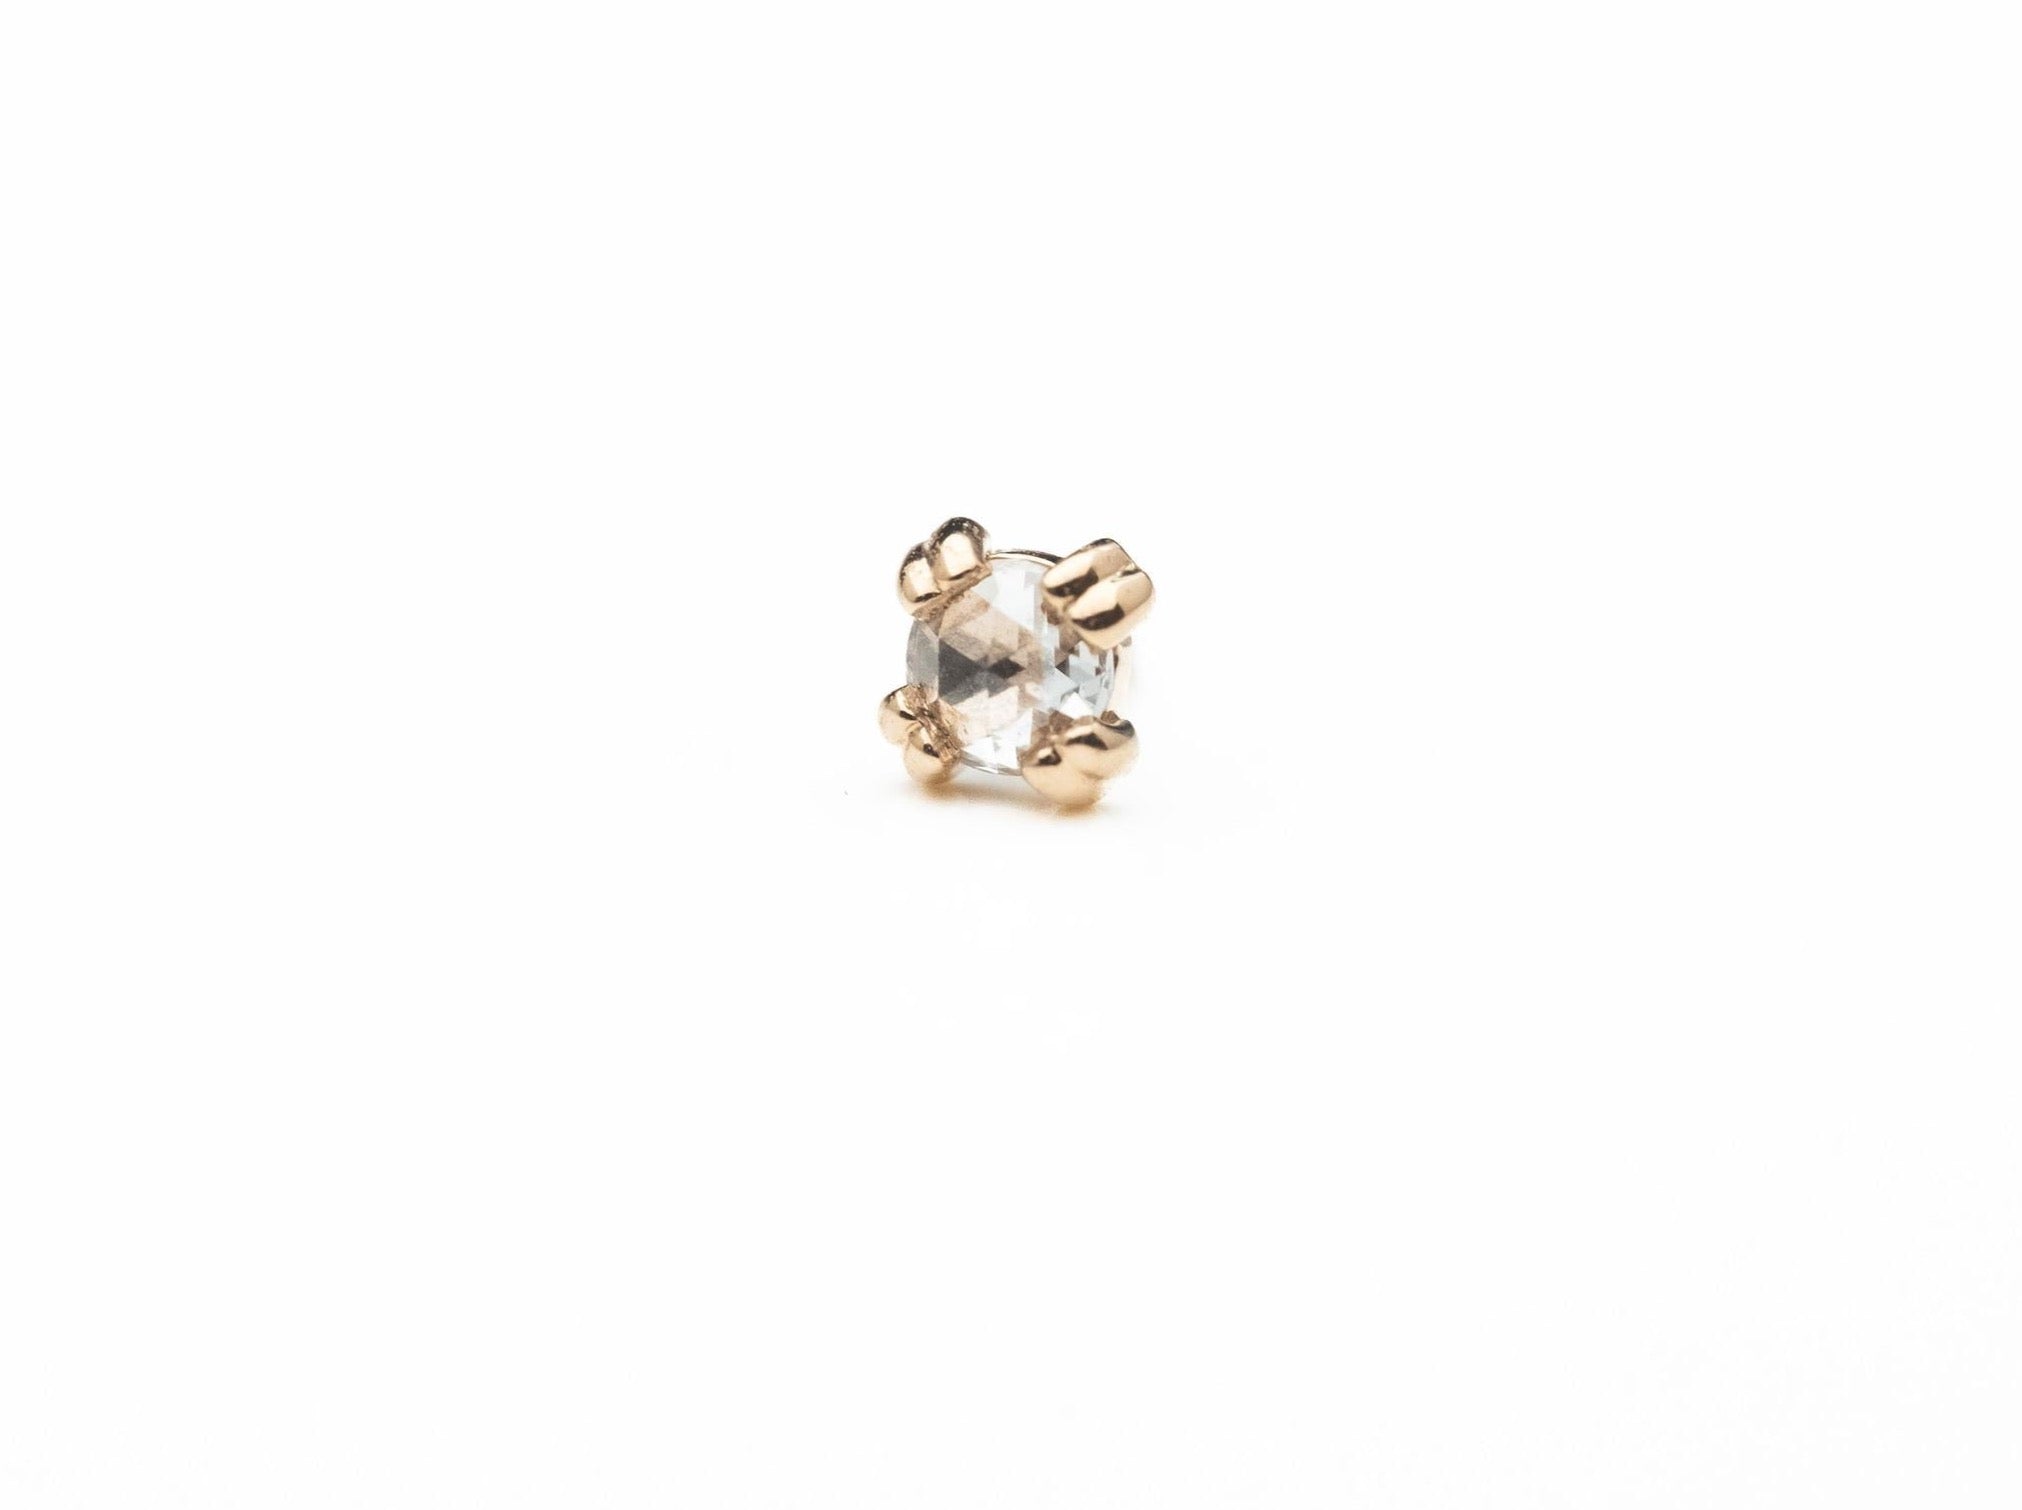 Cab Prong 2mm Rose Cut VS Diamond in 14k Rose Gold Threadless by BVLA